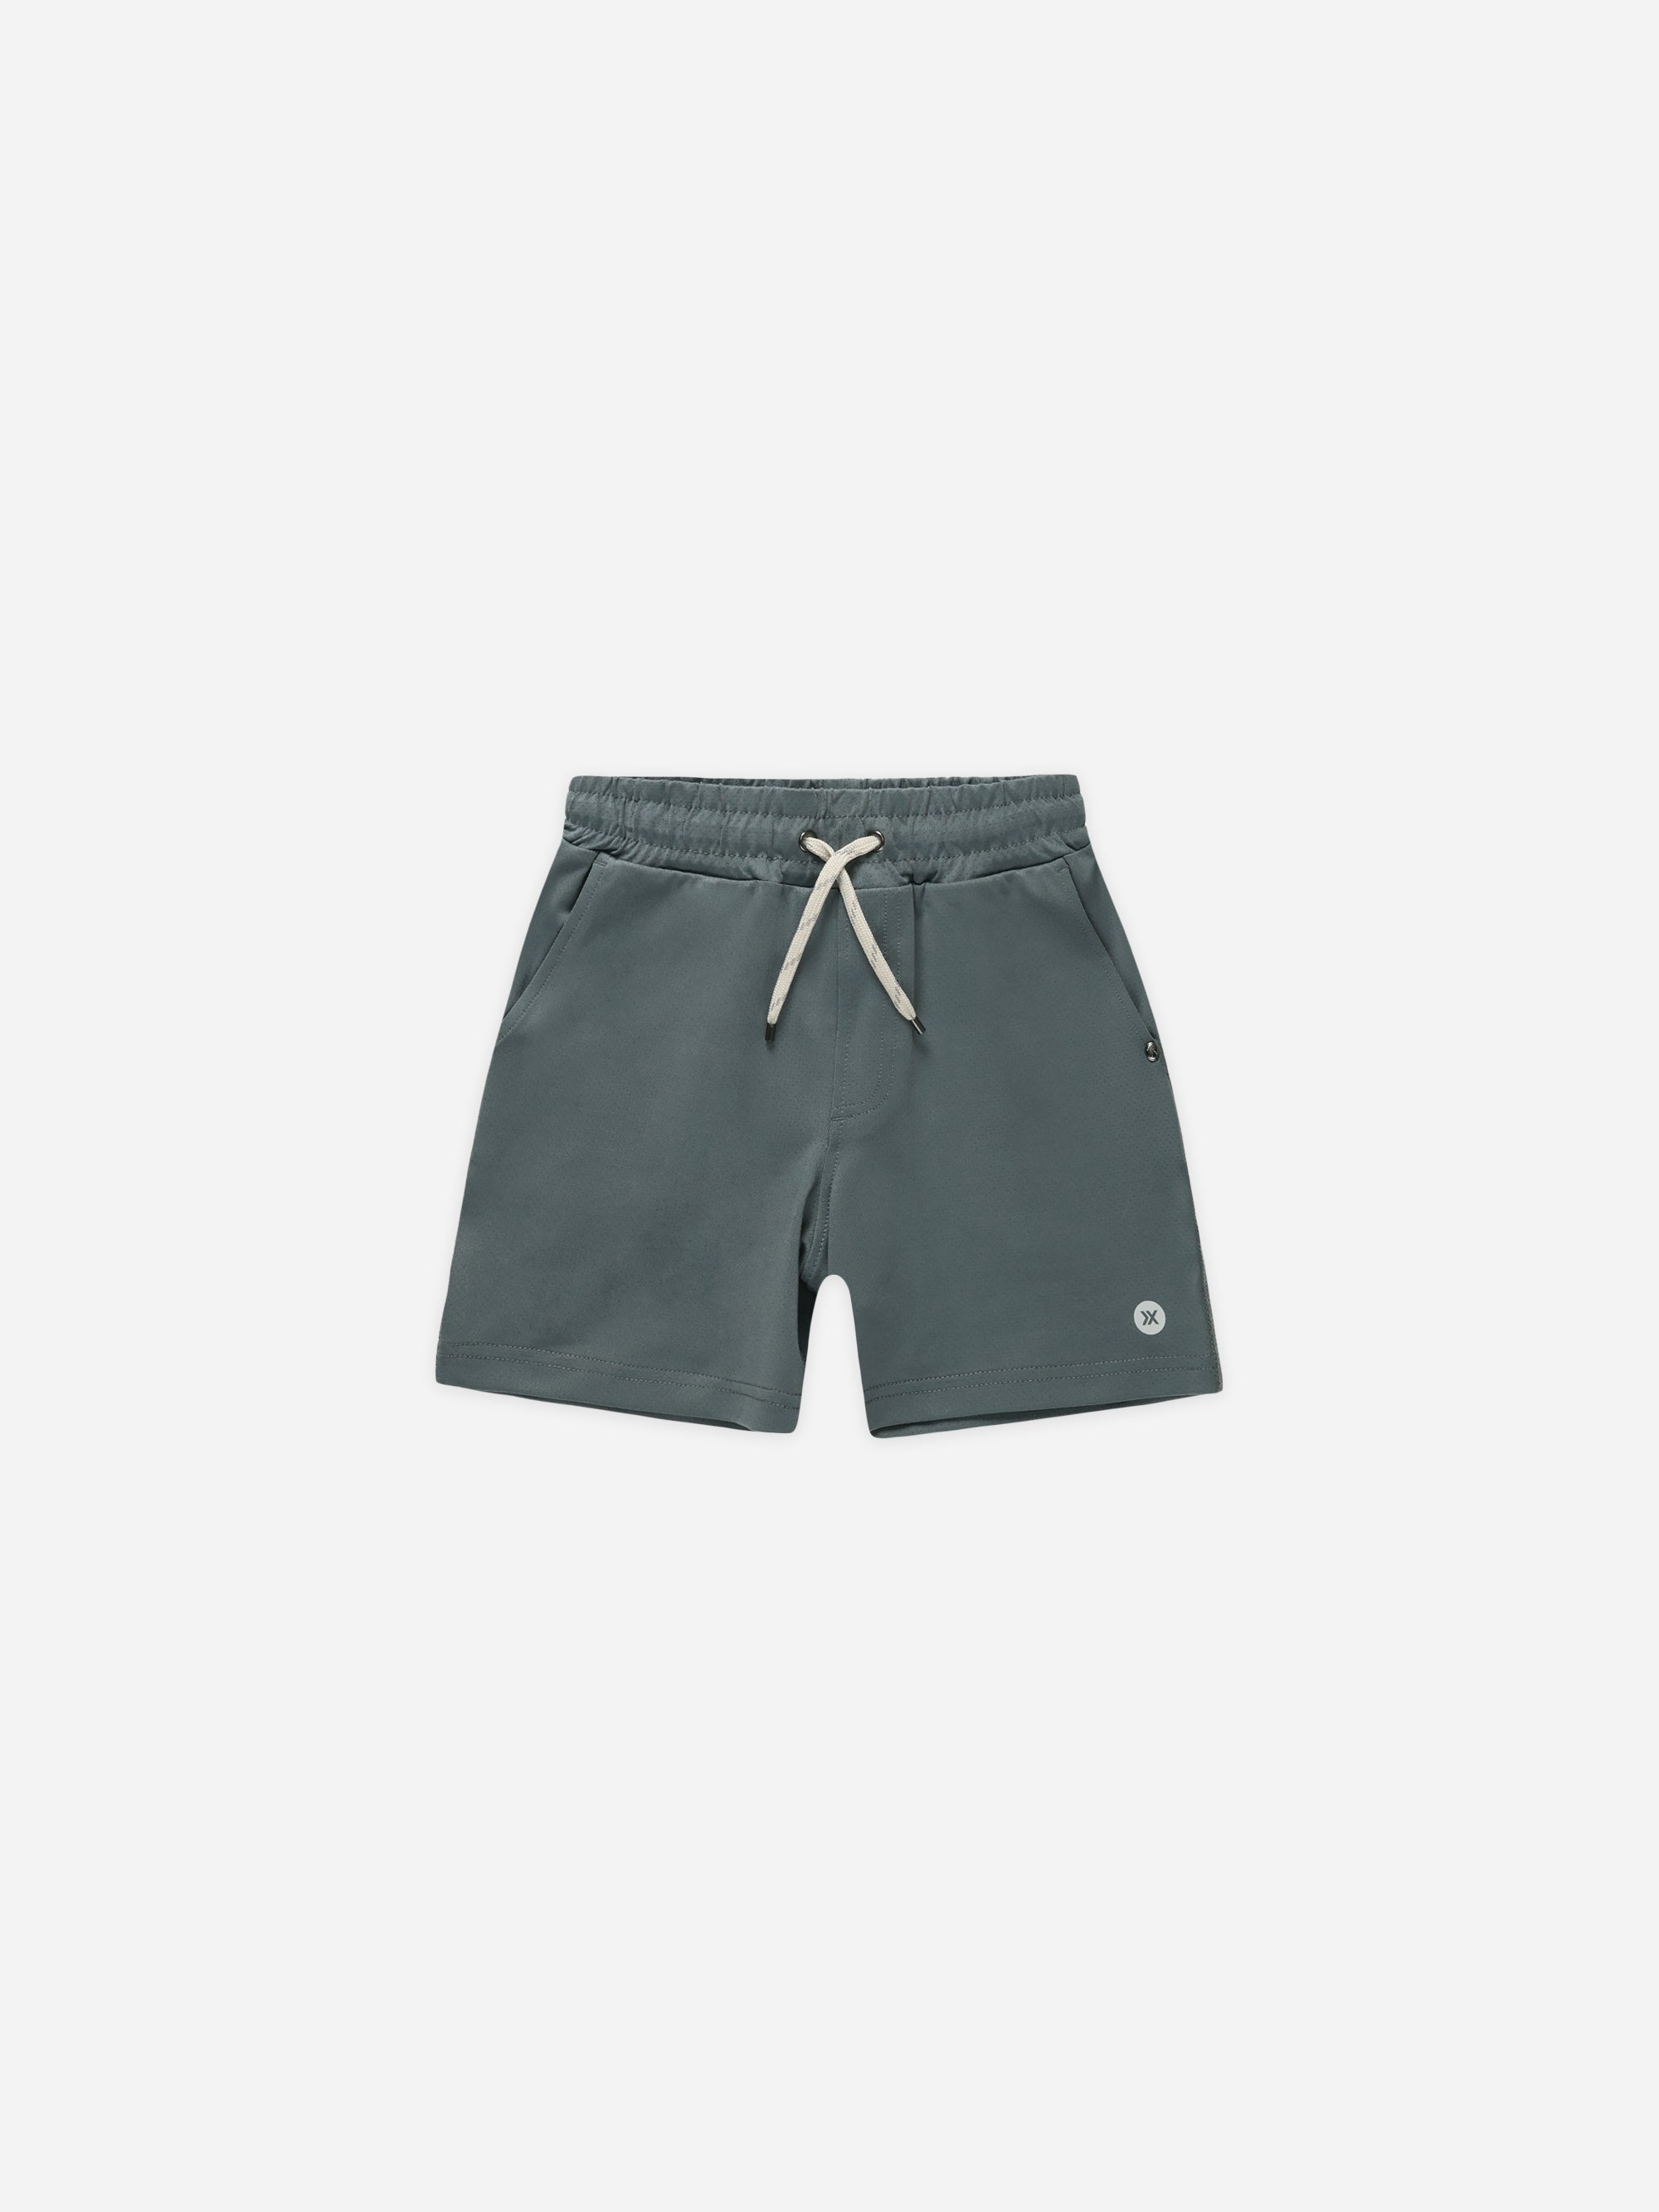 Oceanside Tech Short || Indigo - Rylee + Cru | Kids Clothes | Trendy Baby Clothes | Modern Infant Outfits |